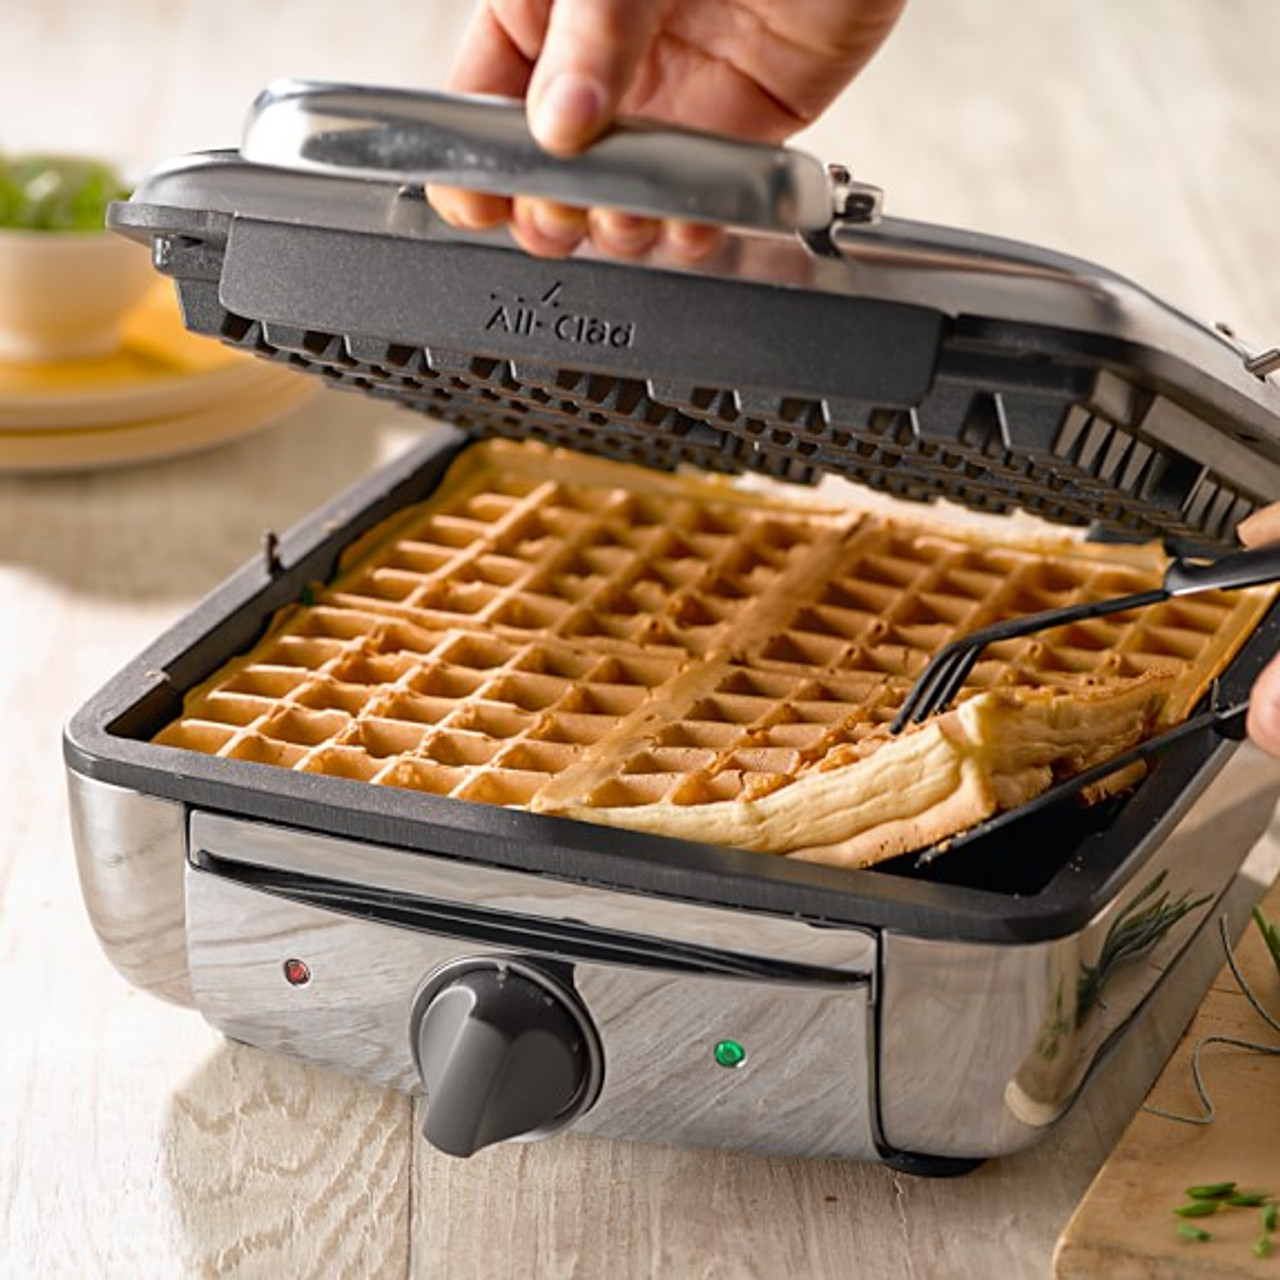 All-Clad Belgian Stainless Steel 4 Slice WaffleMaker 